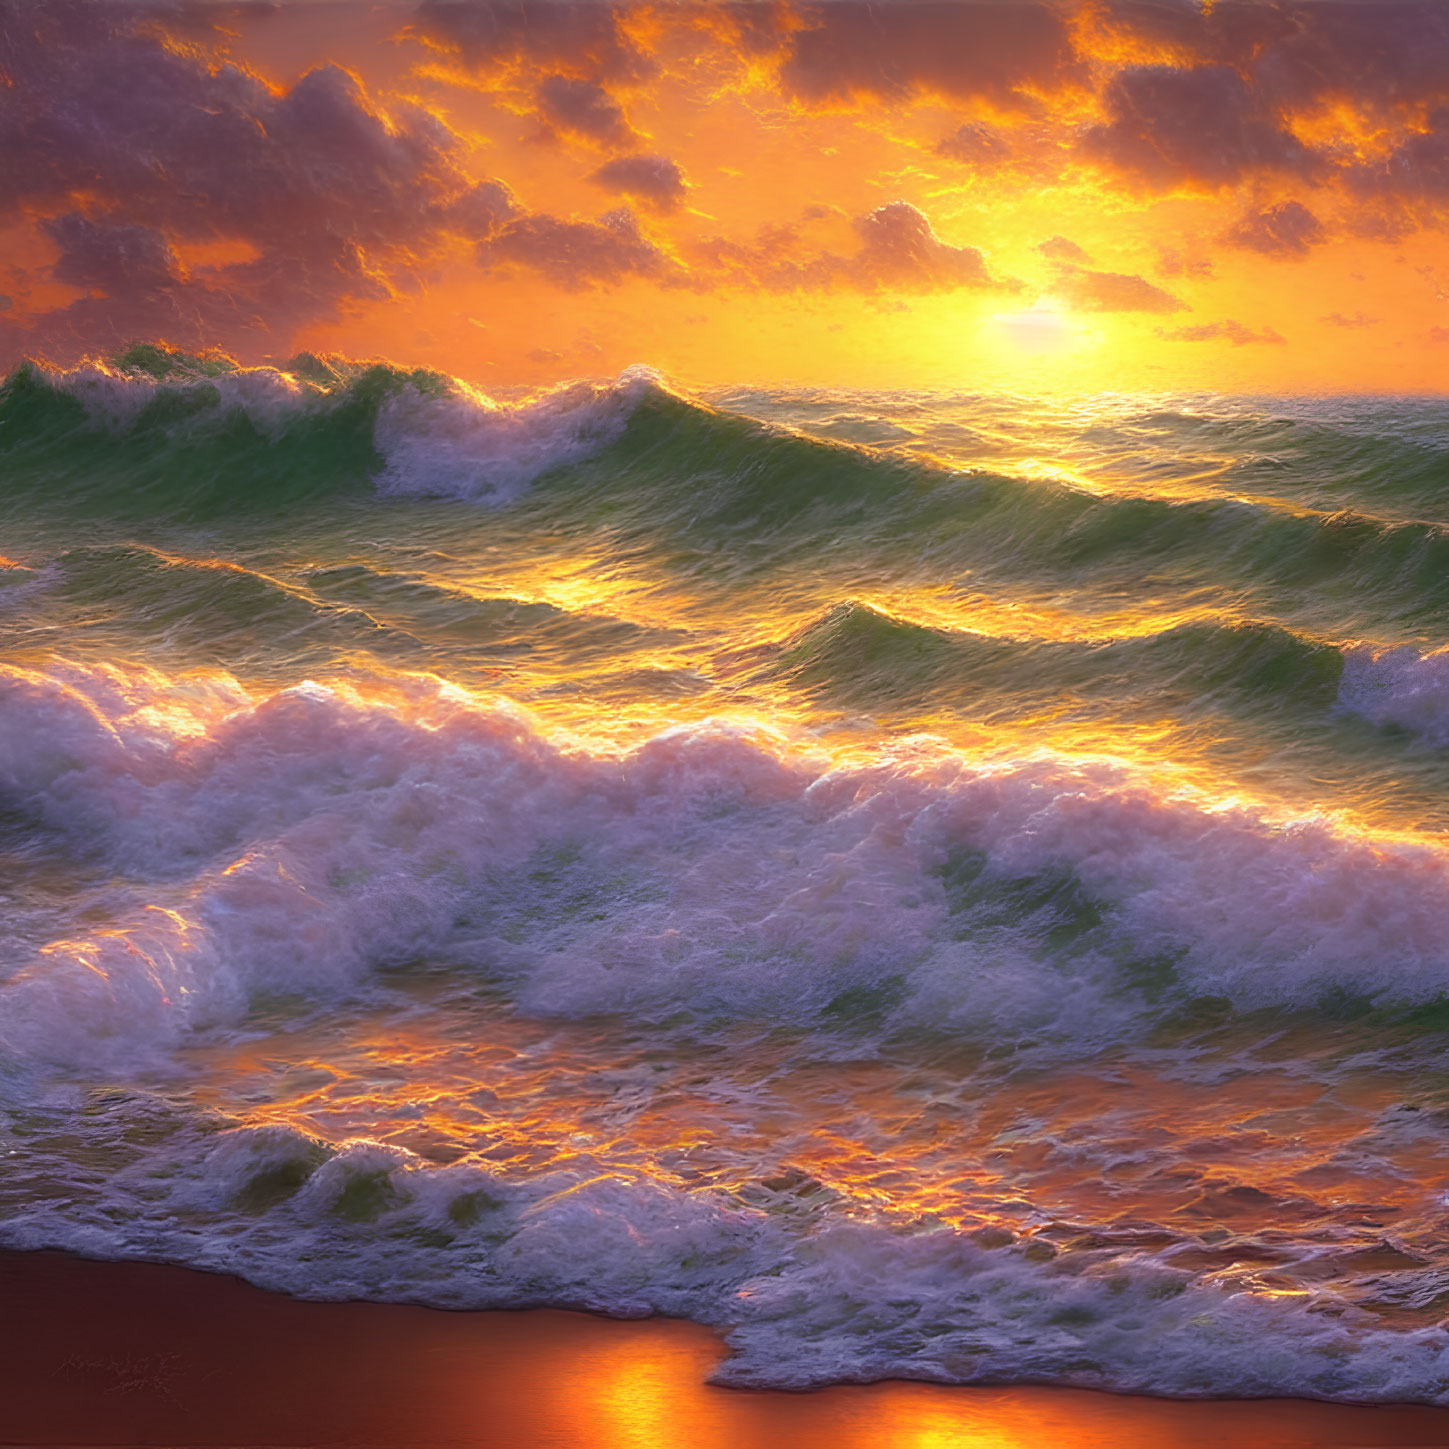 Vibrant sunset over crashing waves and golden sky